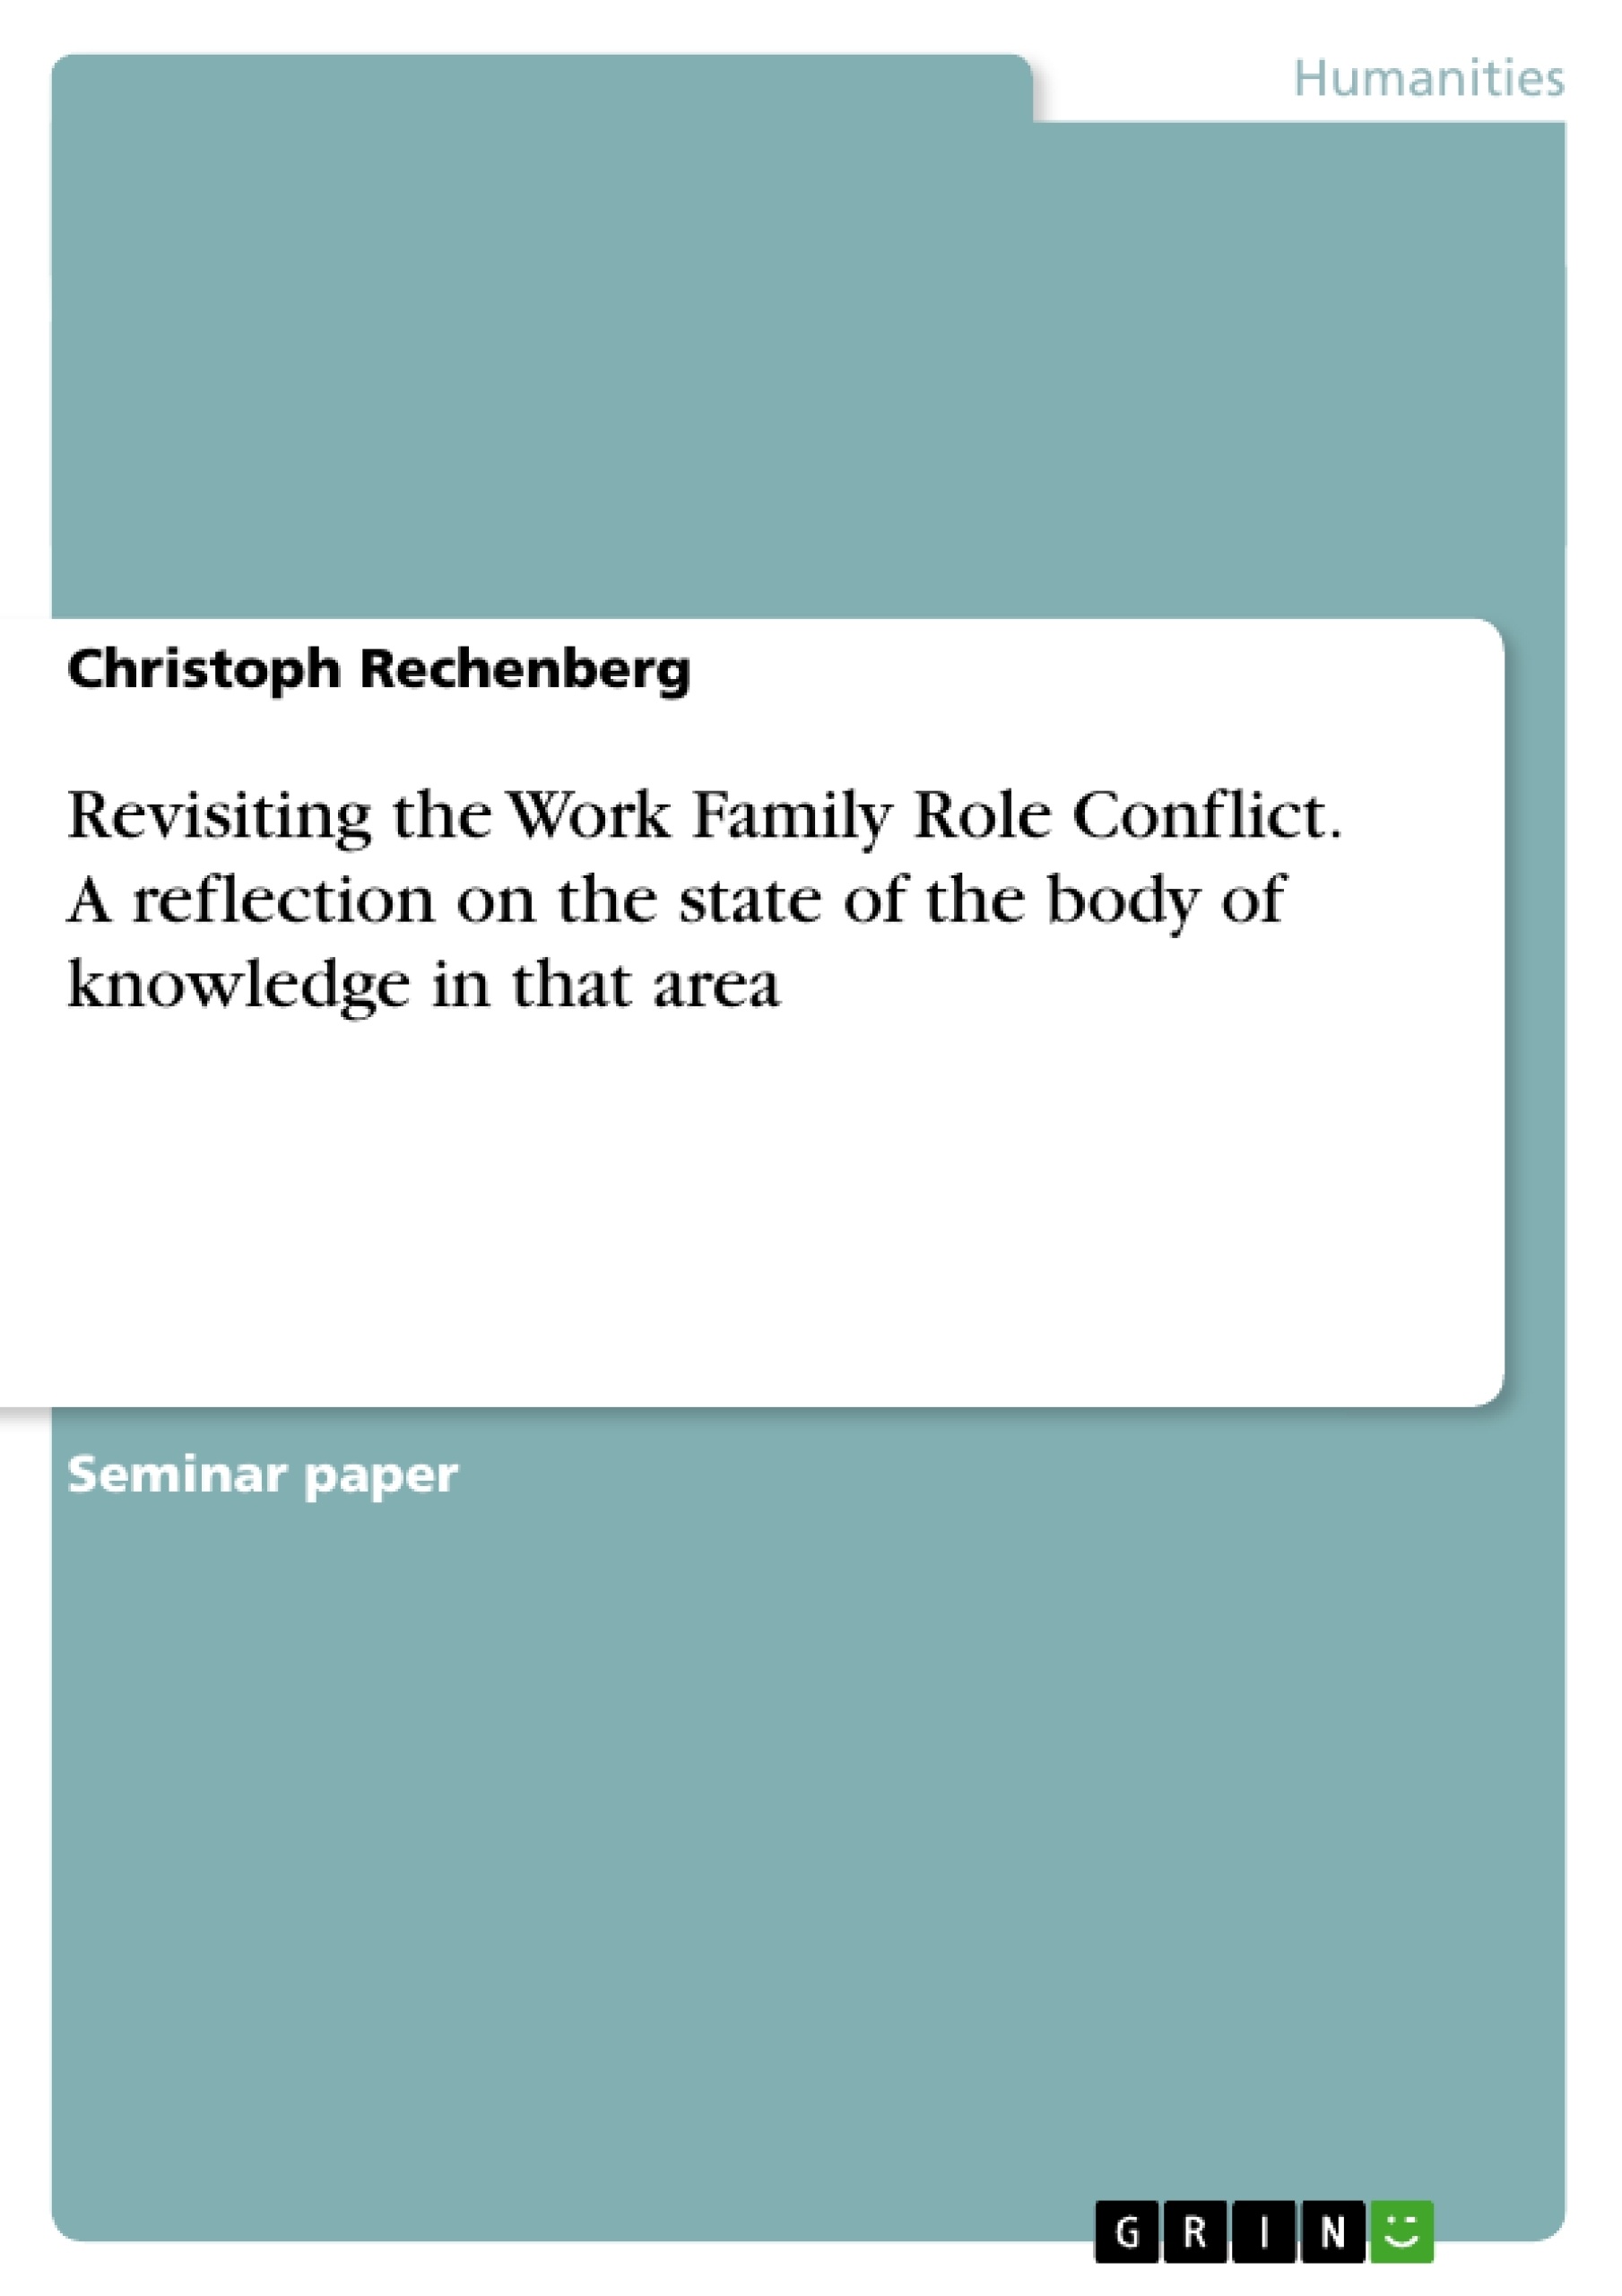 Title: Revisiting the Work Family Role Conflict. A reflection on the state of the body of knowledge in that area